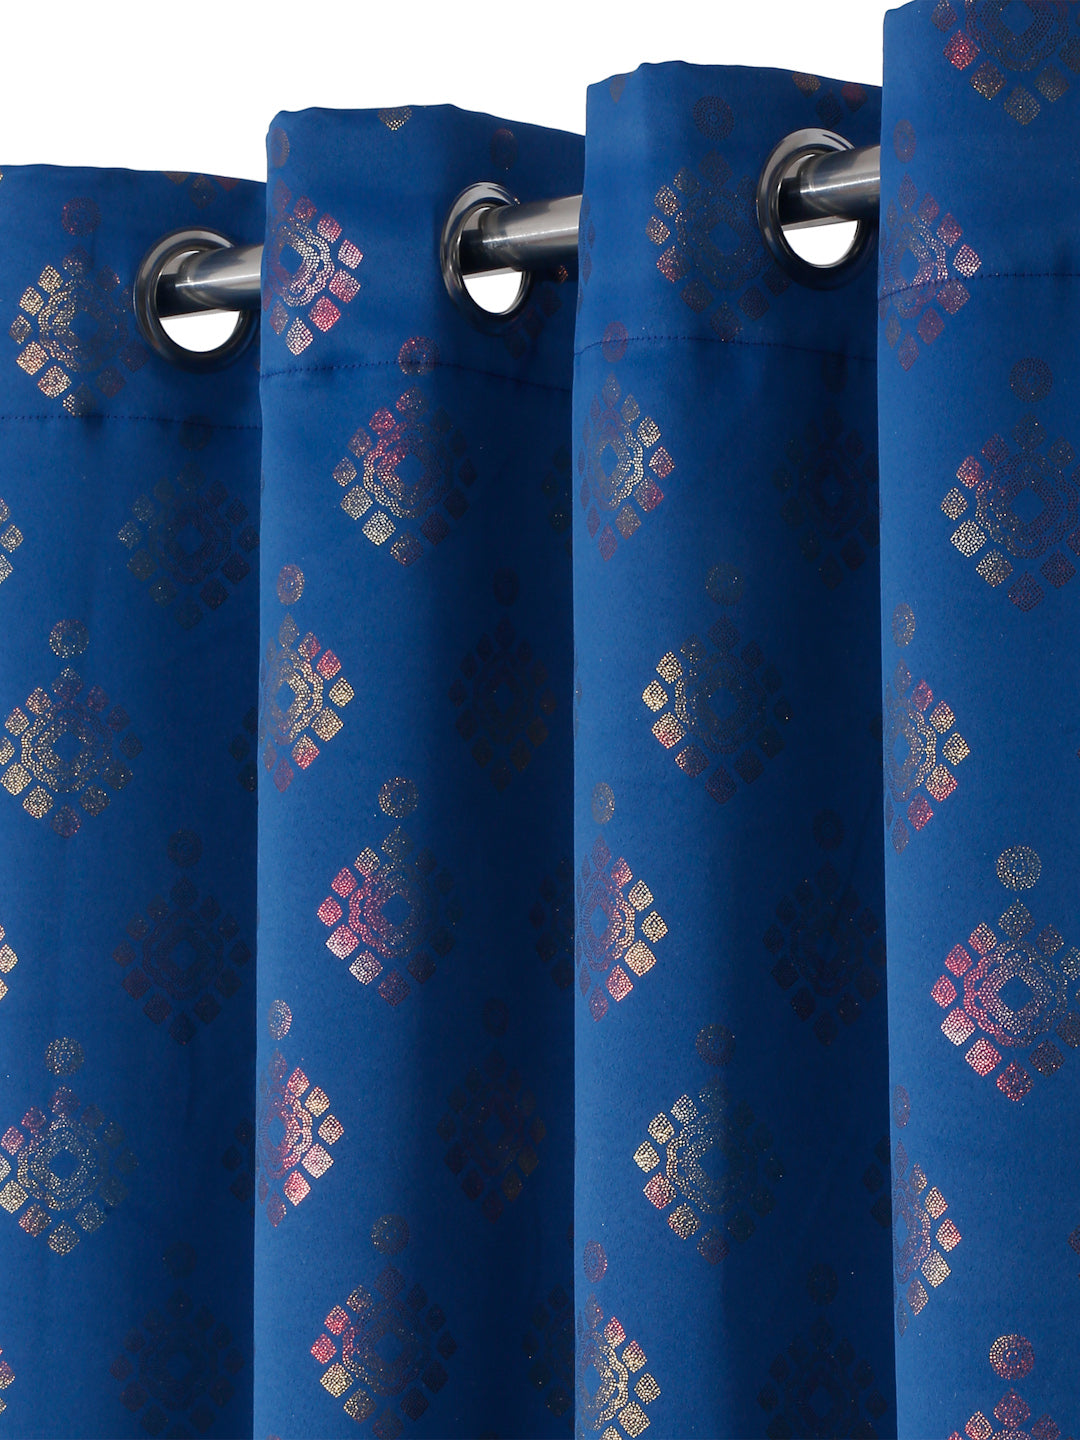 Pack of 2 Polyester Blackout Foil Long Door Curtains- Navy Blue